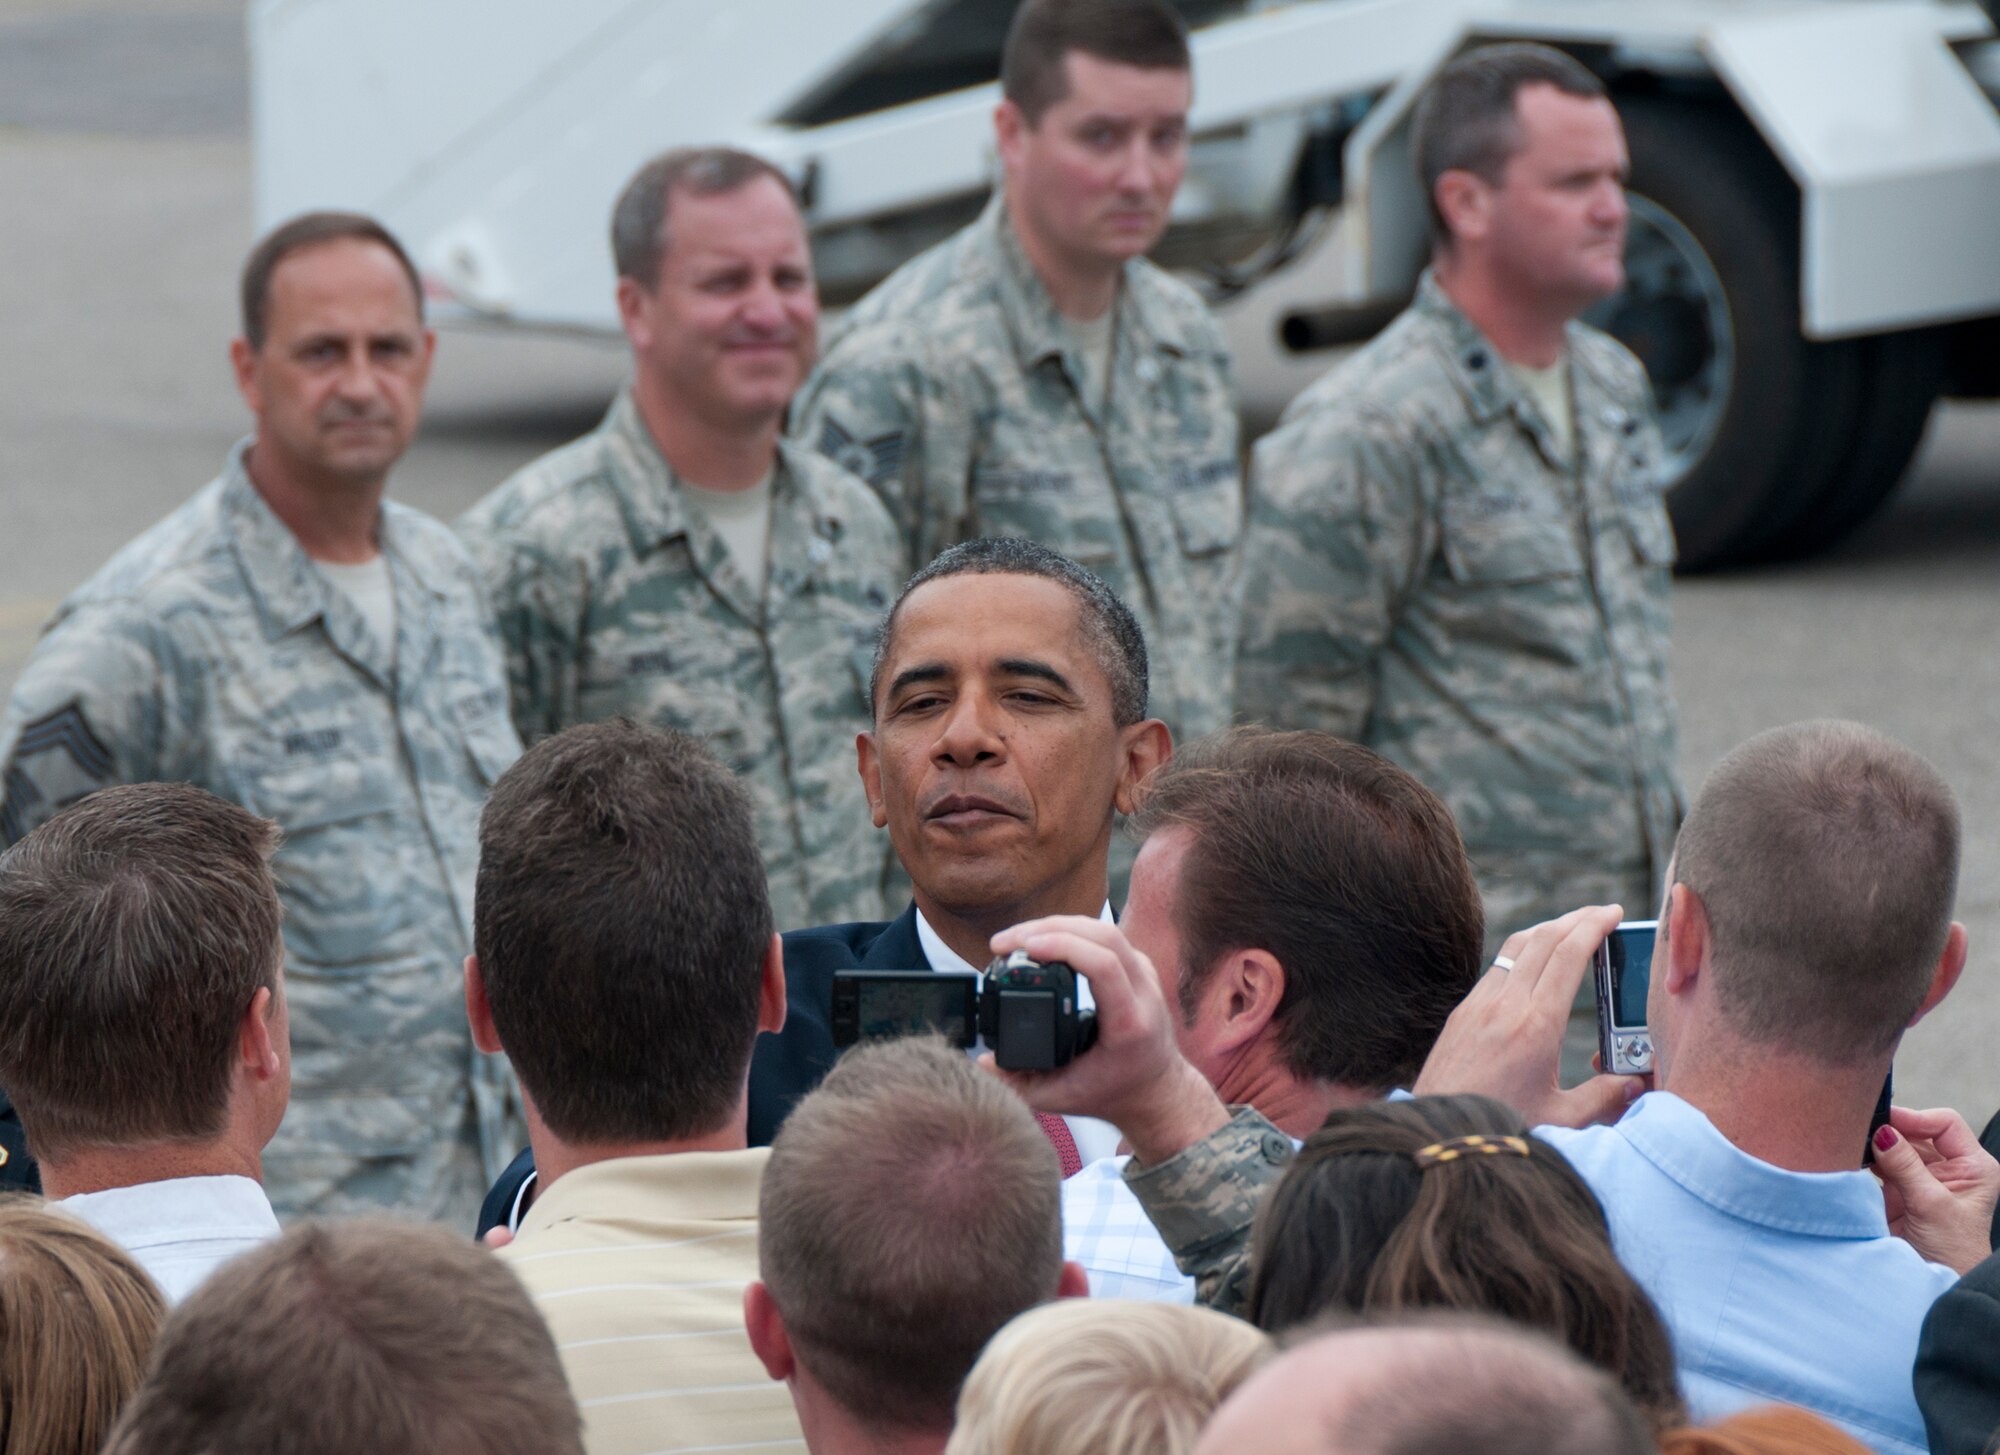 President Barack Obama greets well-wishers as he steps off Air Force One on the ramp of the 133rd Airlift Wing at the Minneapolis-St. Paul International Airport on August 30, 2011. The president is in the Twin Cities to deliver a speech to the American Legion Annual Conference. The visit is heavily supported with security, logistics, media and other support by the Airmen of the 133rd Airlift Wing. USAF official photo by Senior Master Sgt. Mark Moss